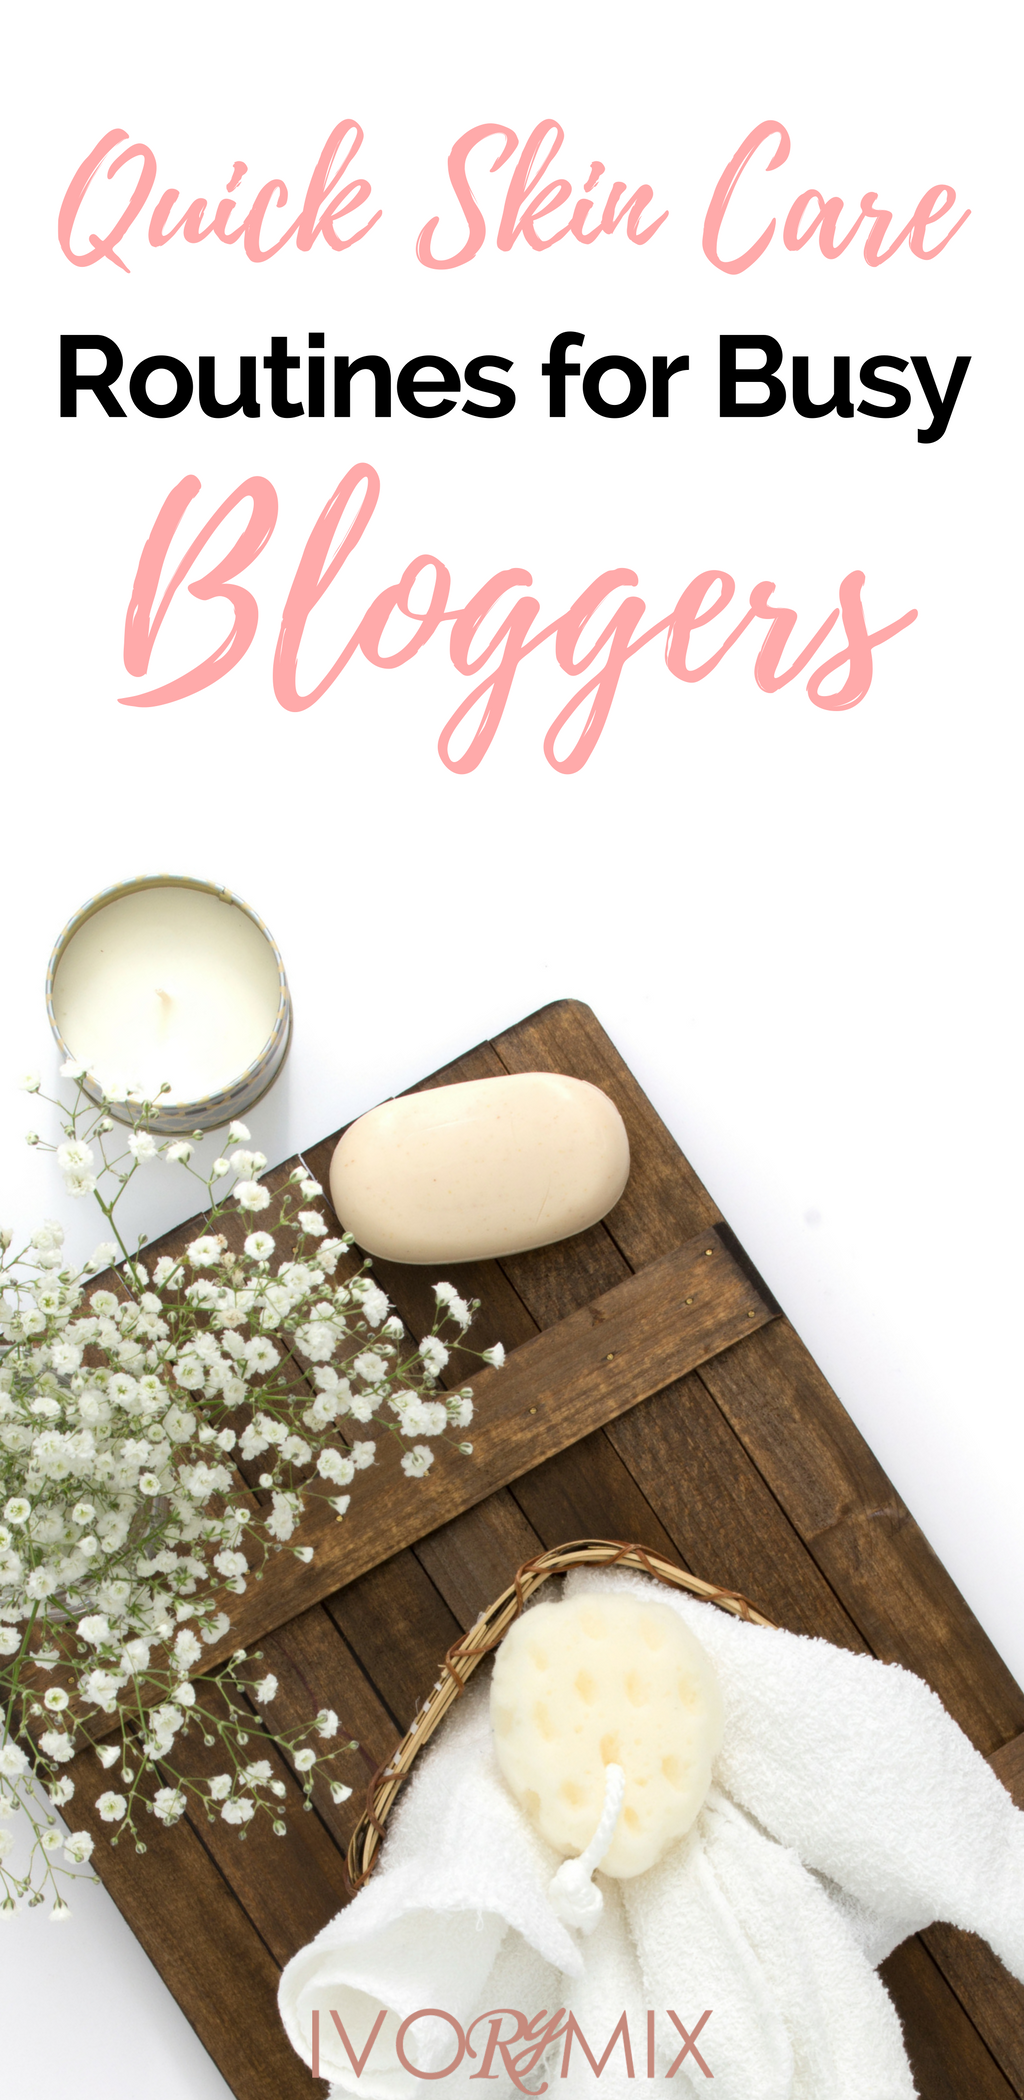 the top 3 quicker skin care tips and routines for busy people, bloggers, and business owners